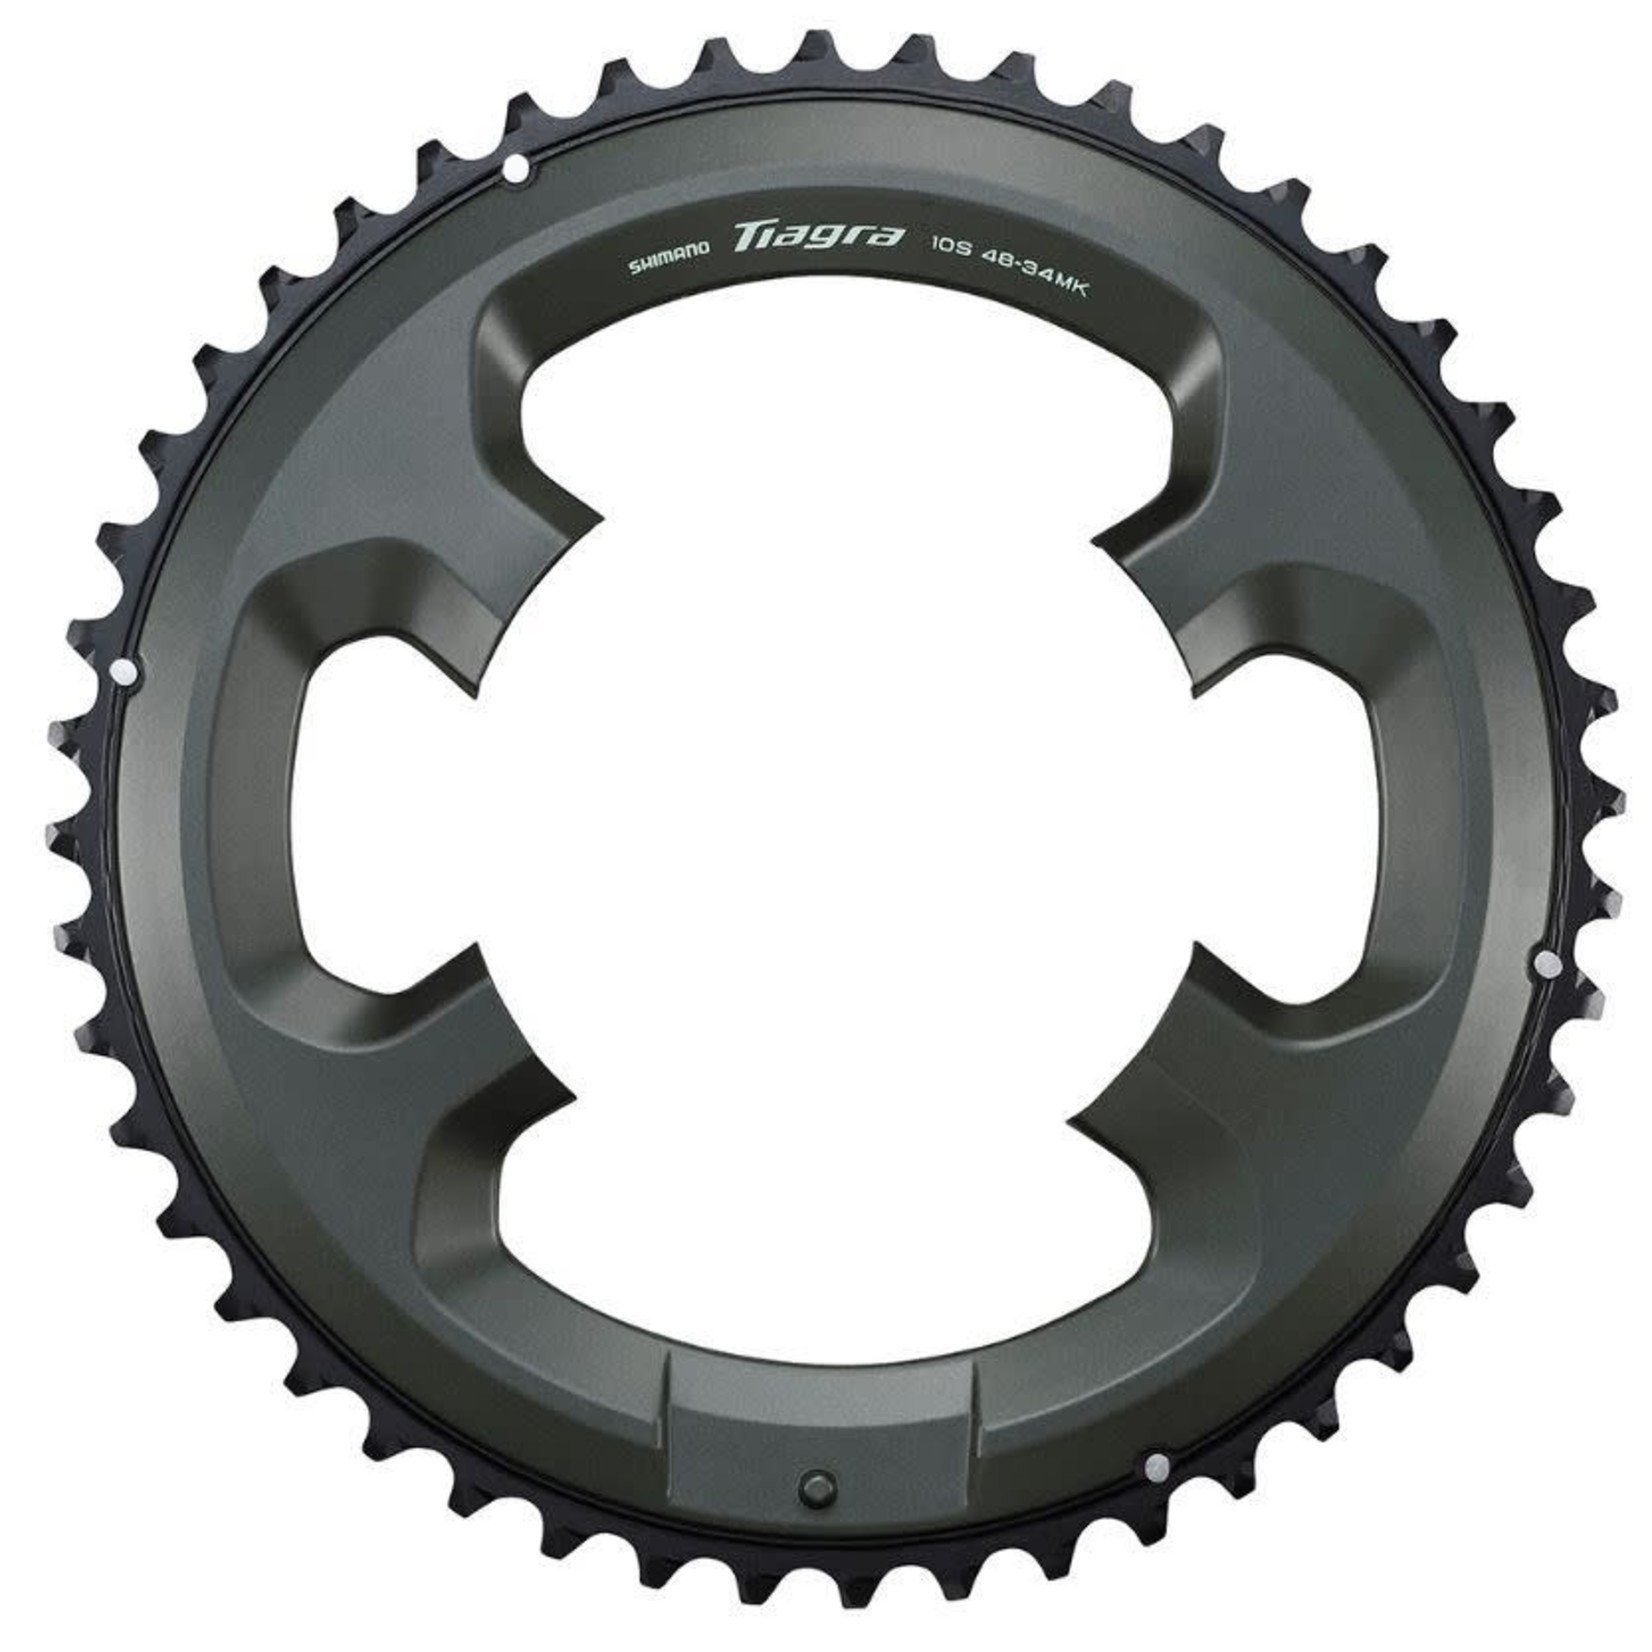 SHIMANO CHAINRING FC-4700  48T for 48-34T MK